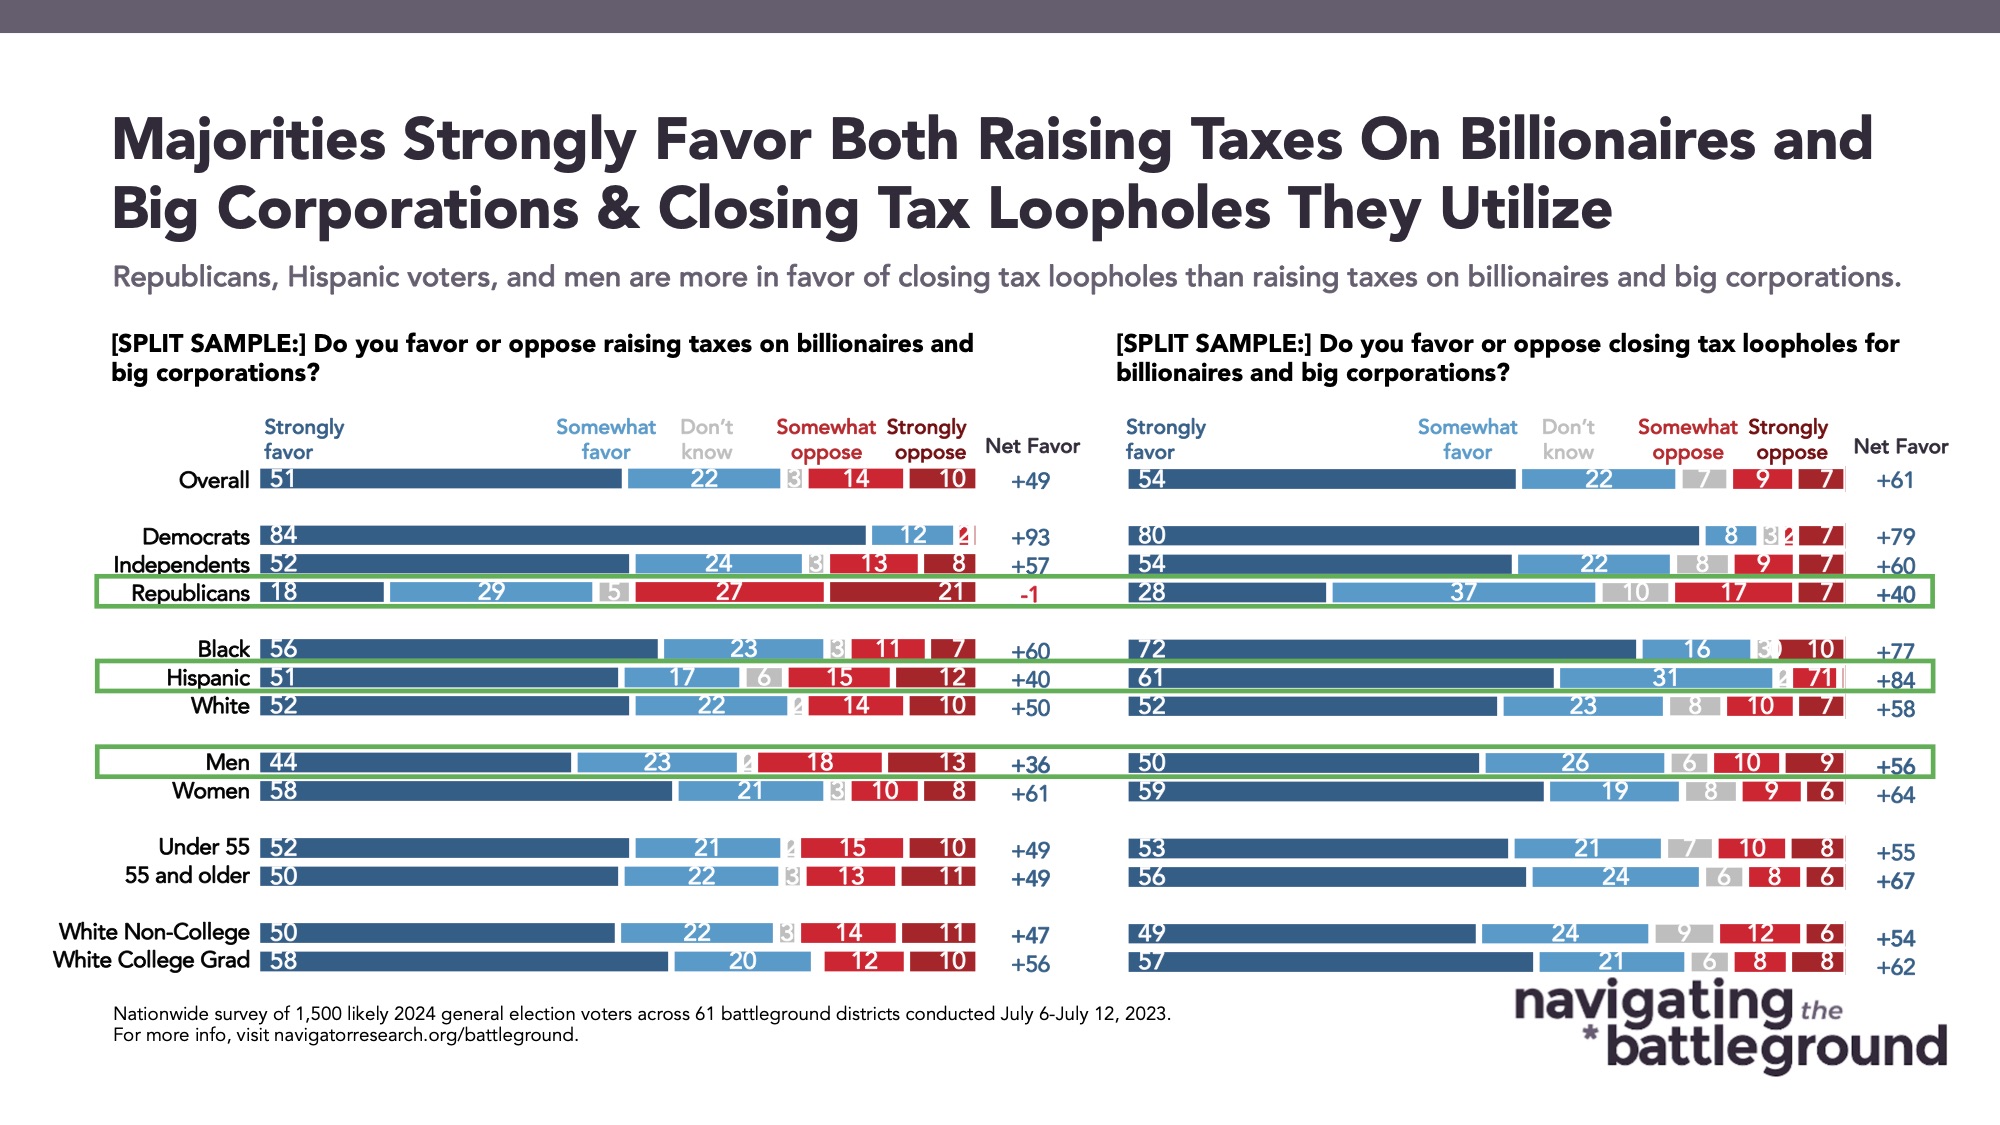 Survey results to the following split sample questions on the Republican tax plan: Do you favor or oppose raising taxes on billionaires and big corporations? Do you favor or oppose closing tax loopholes for billionaires and big corporations?